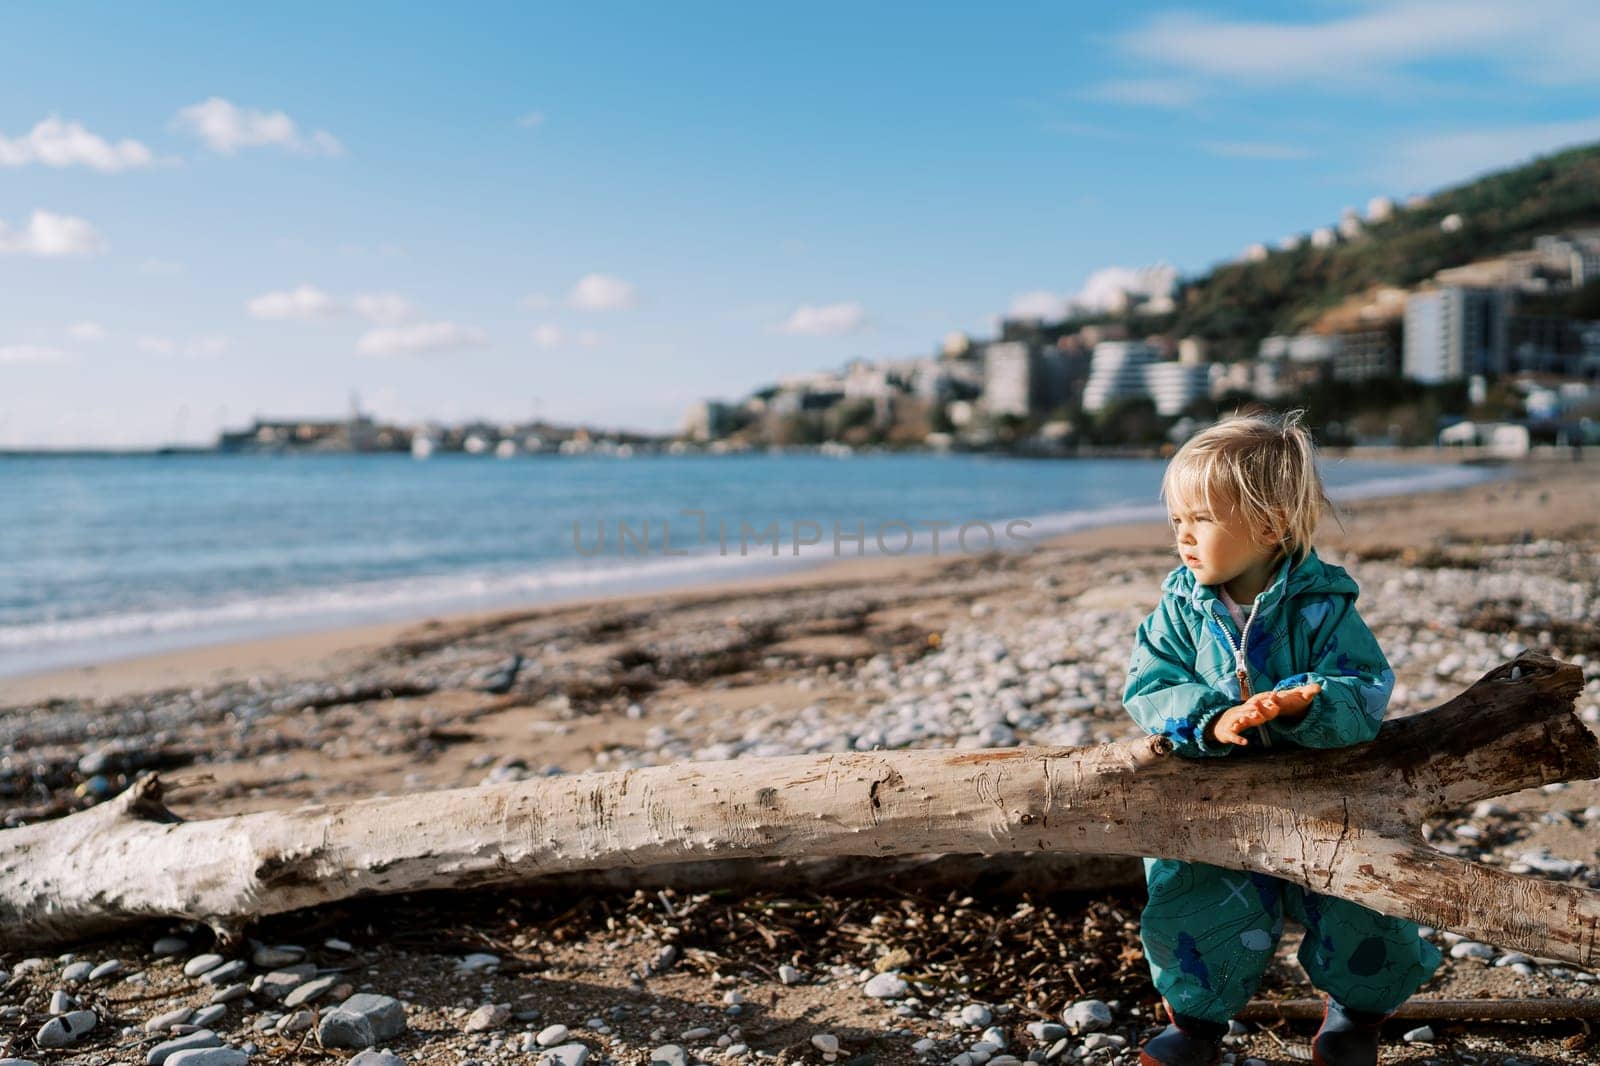 Little girl leaning on a snag on the beach looking at the sea by Nadtochiy